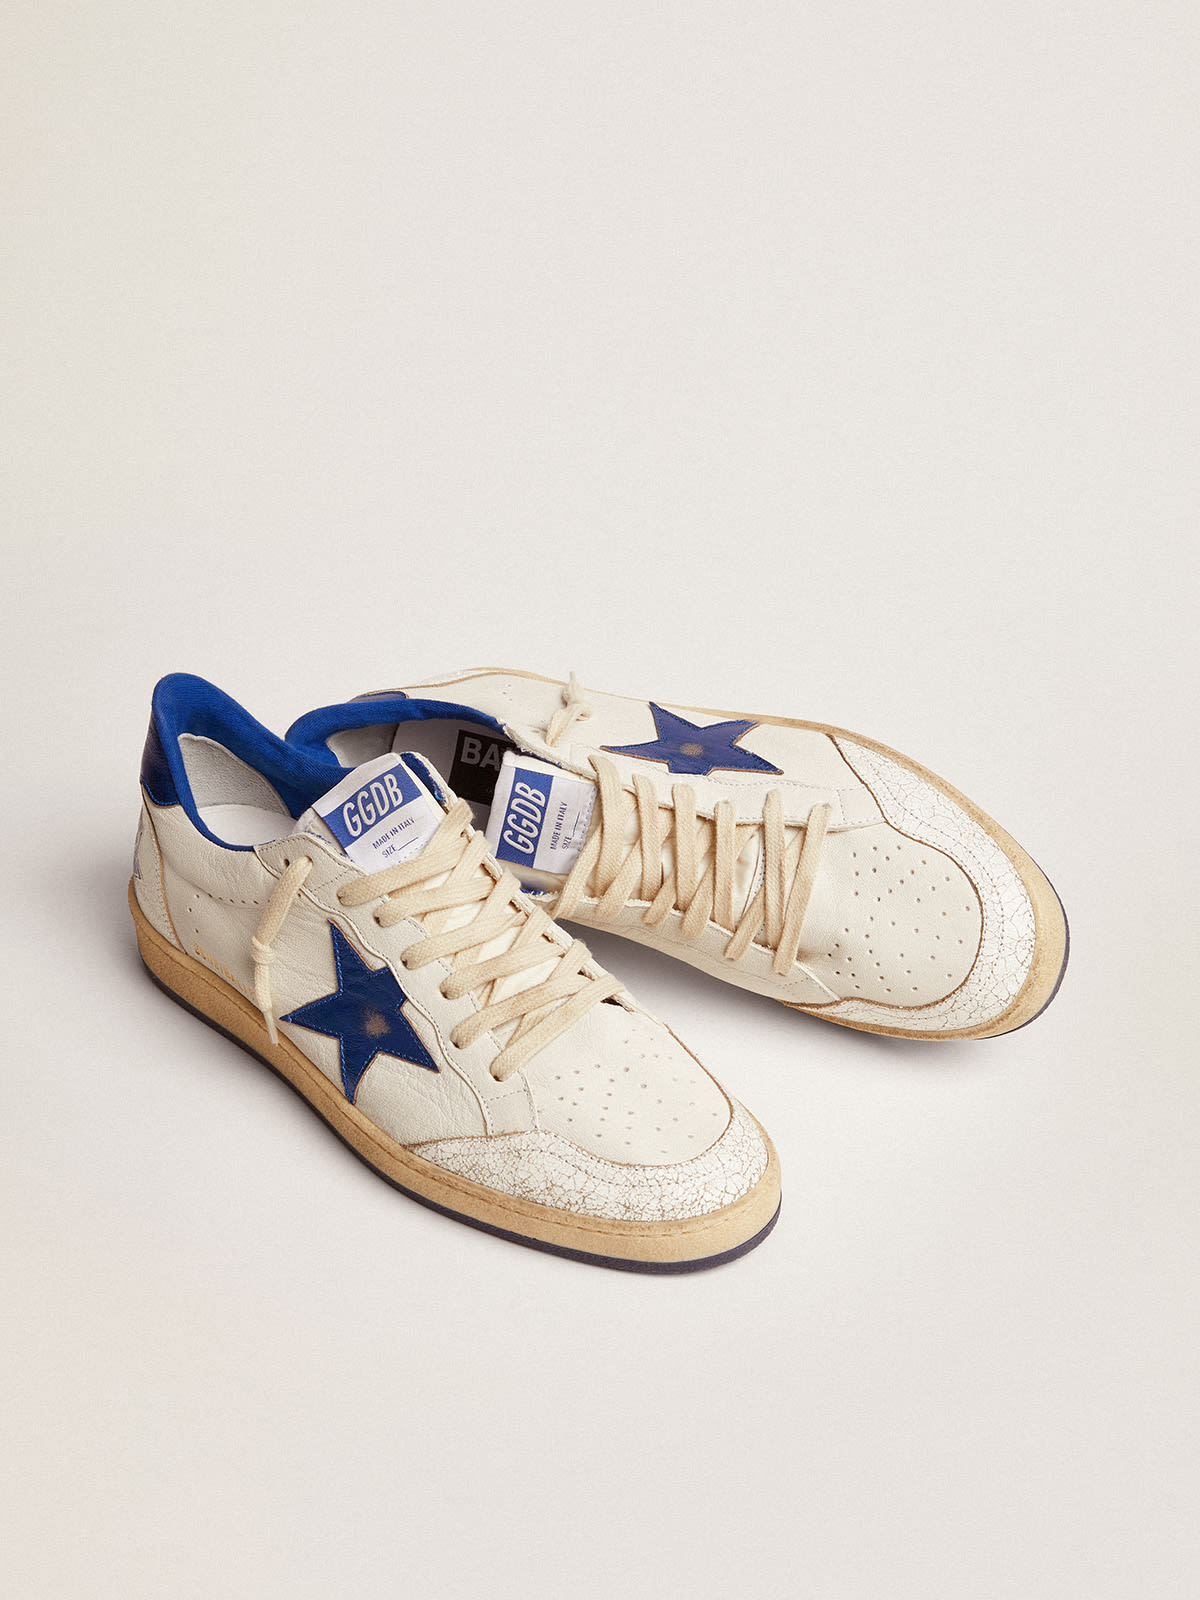 Golden Goose - Men's Ball Star in white nappa with blue star and heel tab in 